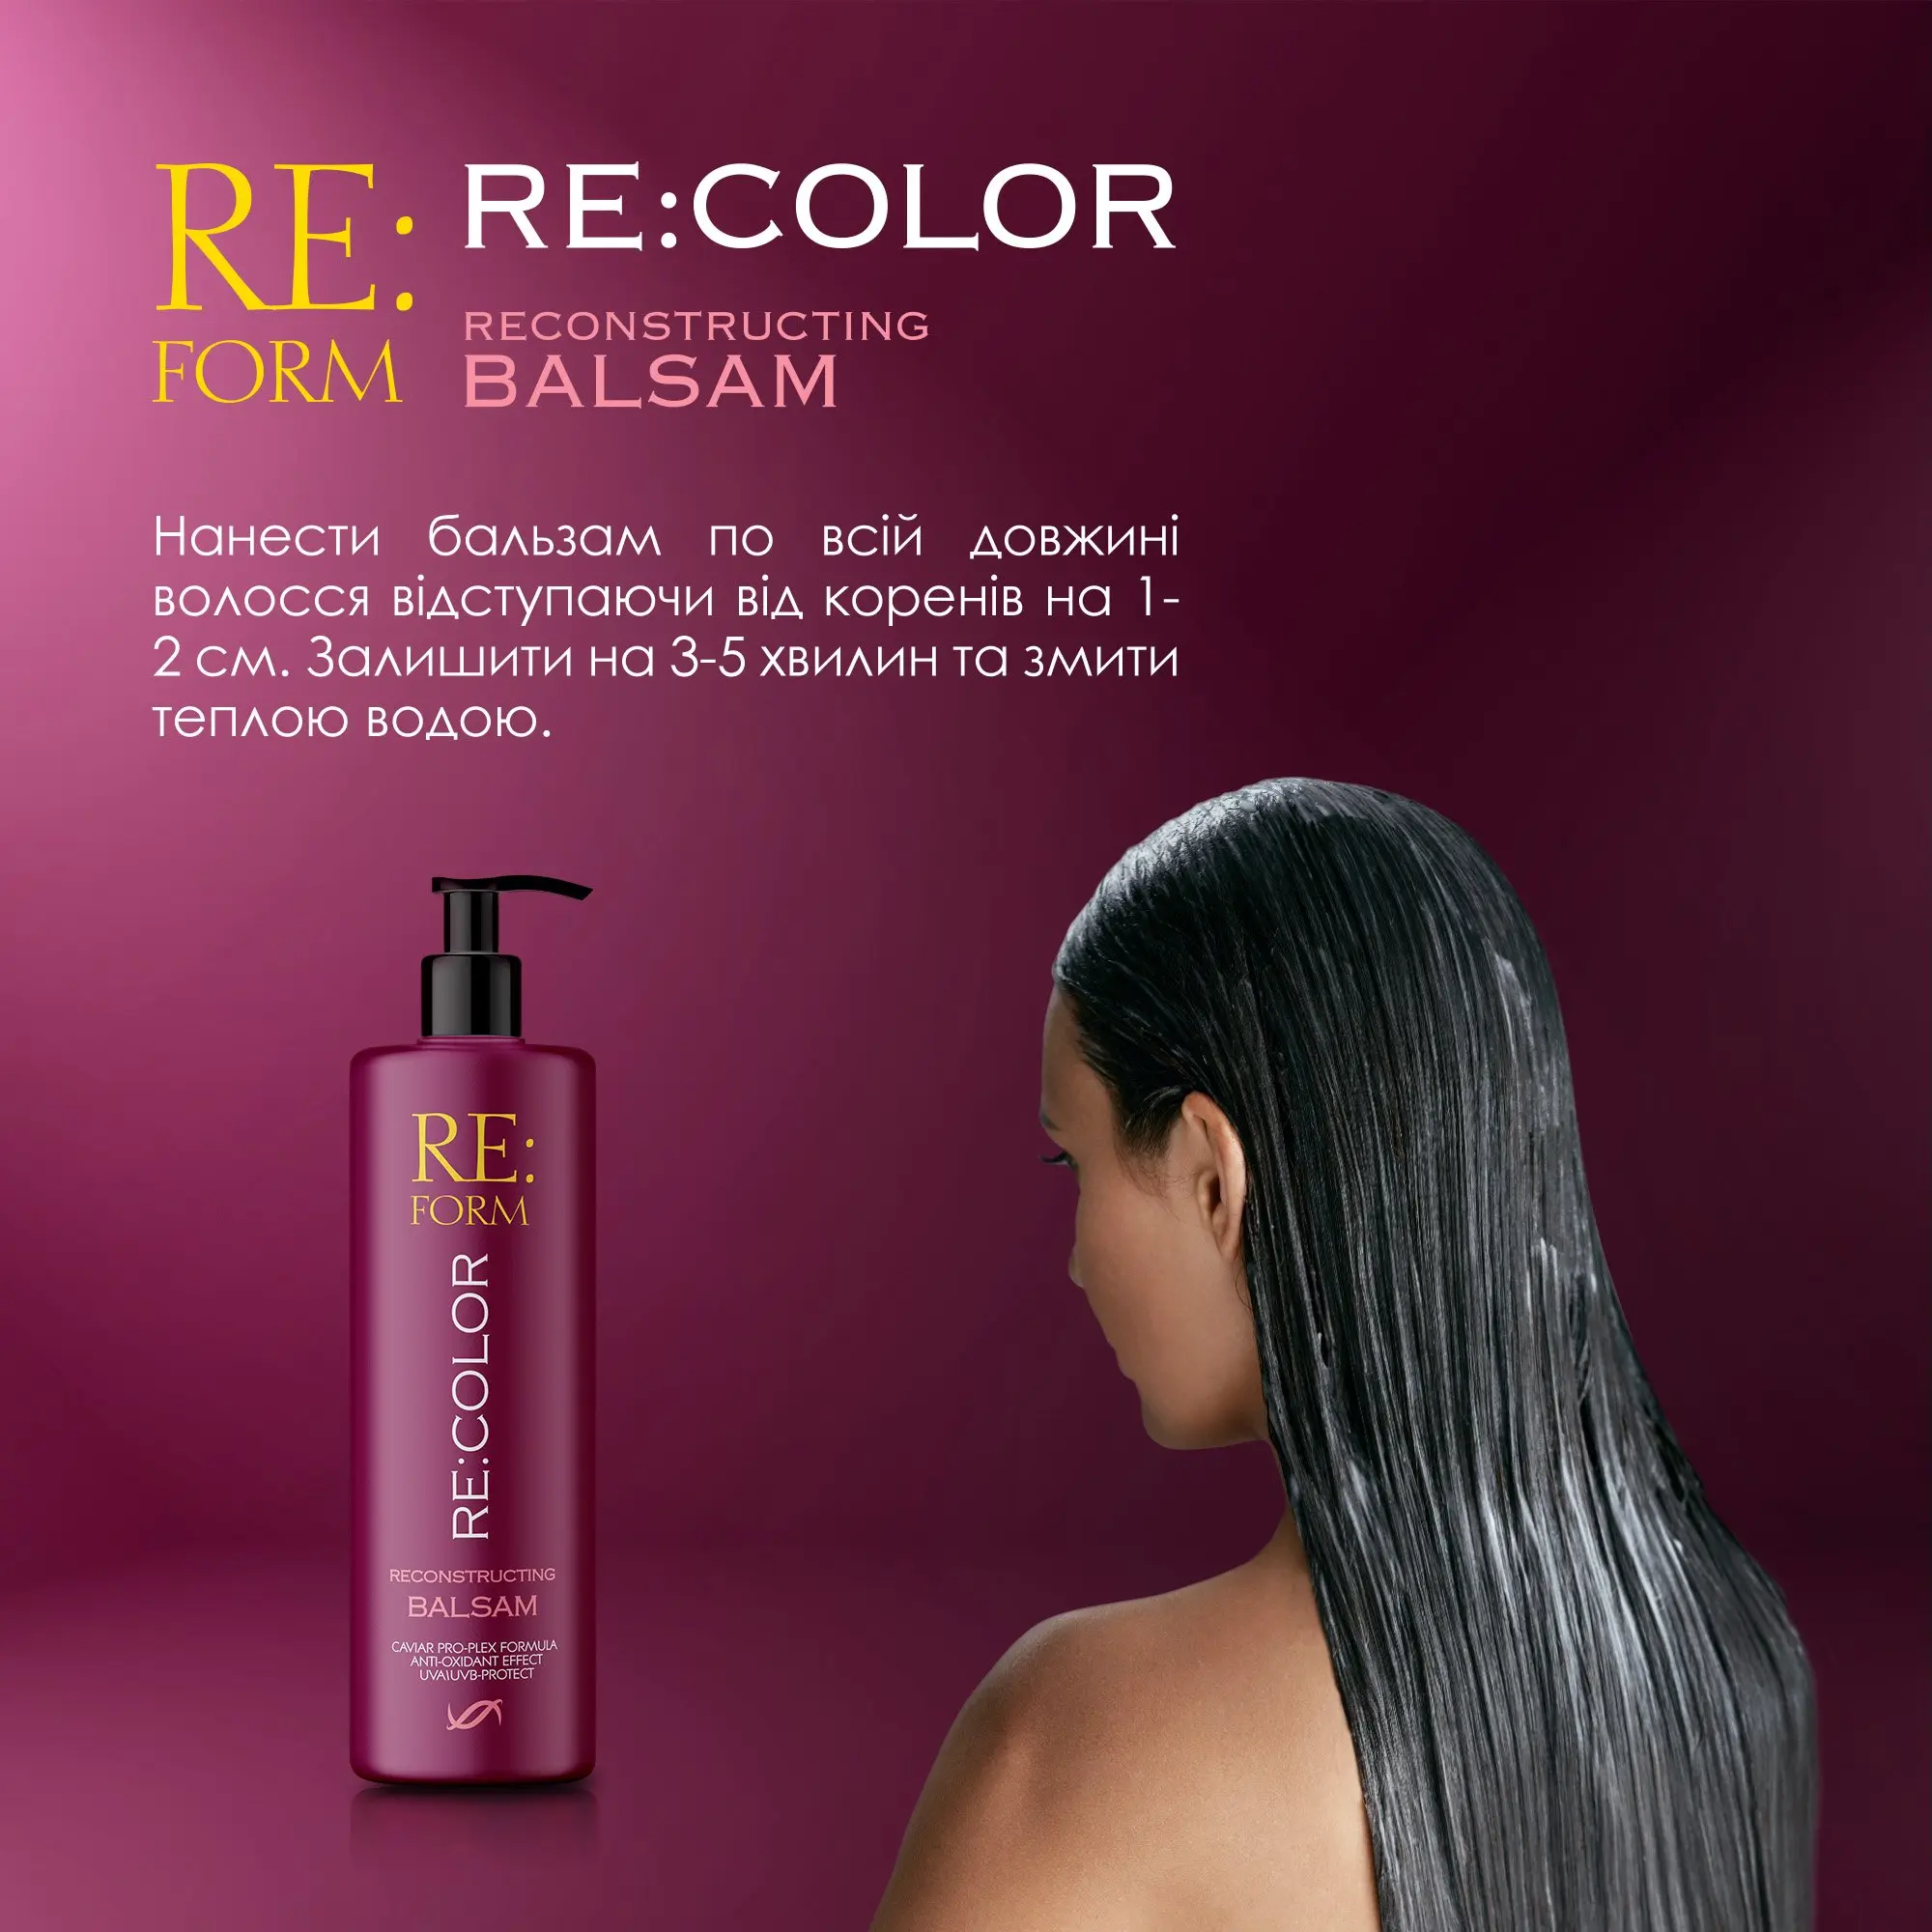 Reconstructing balm, 'RE:COLOR' RE:FORM, 400 ml Фото №11